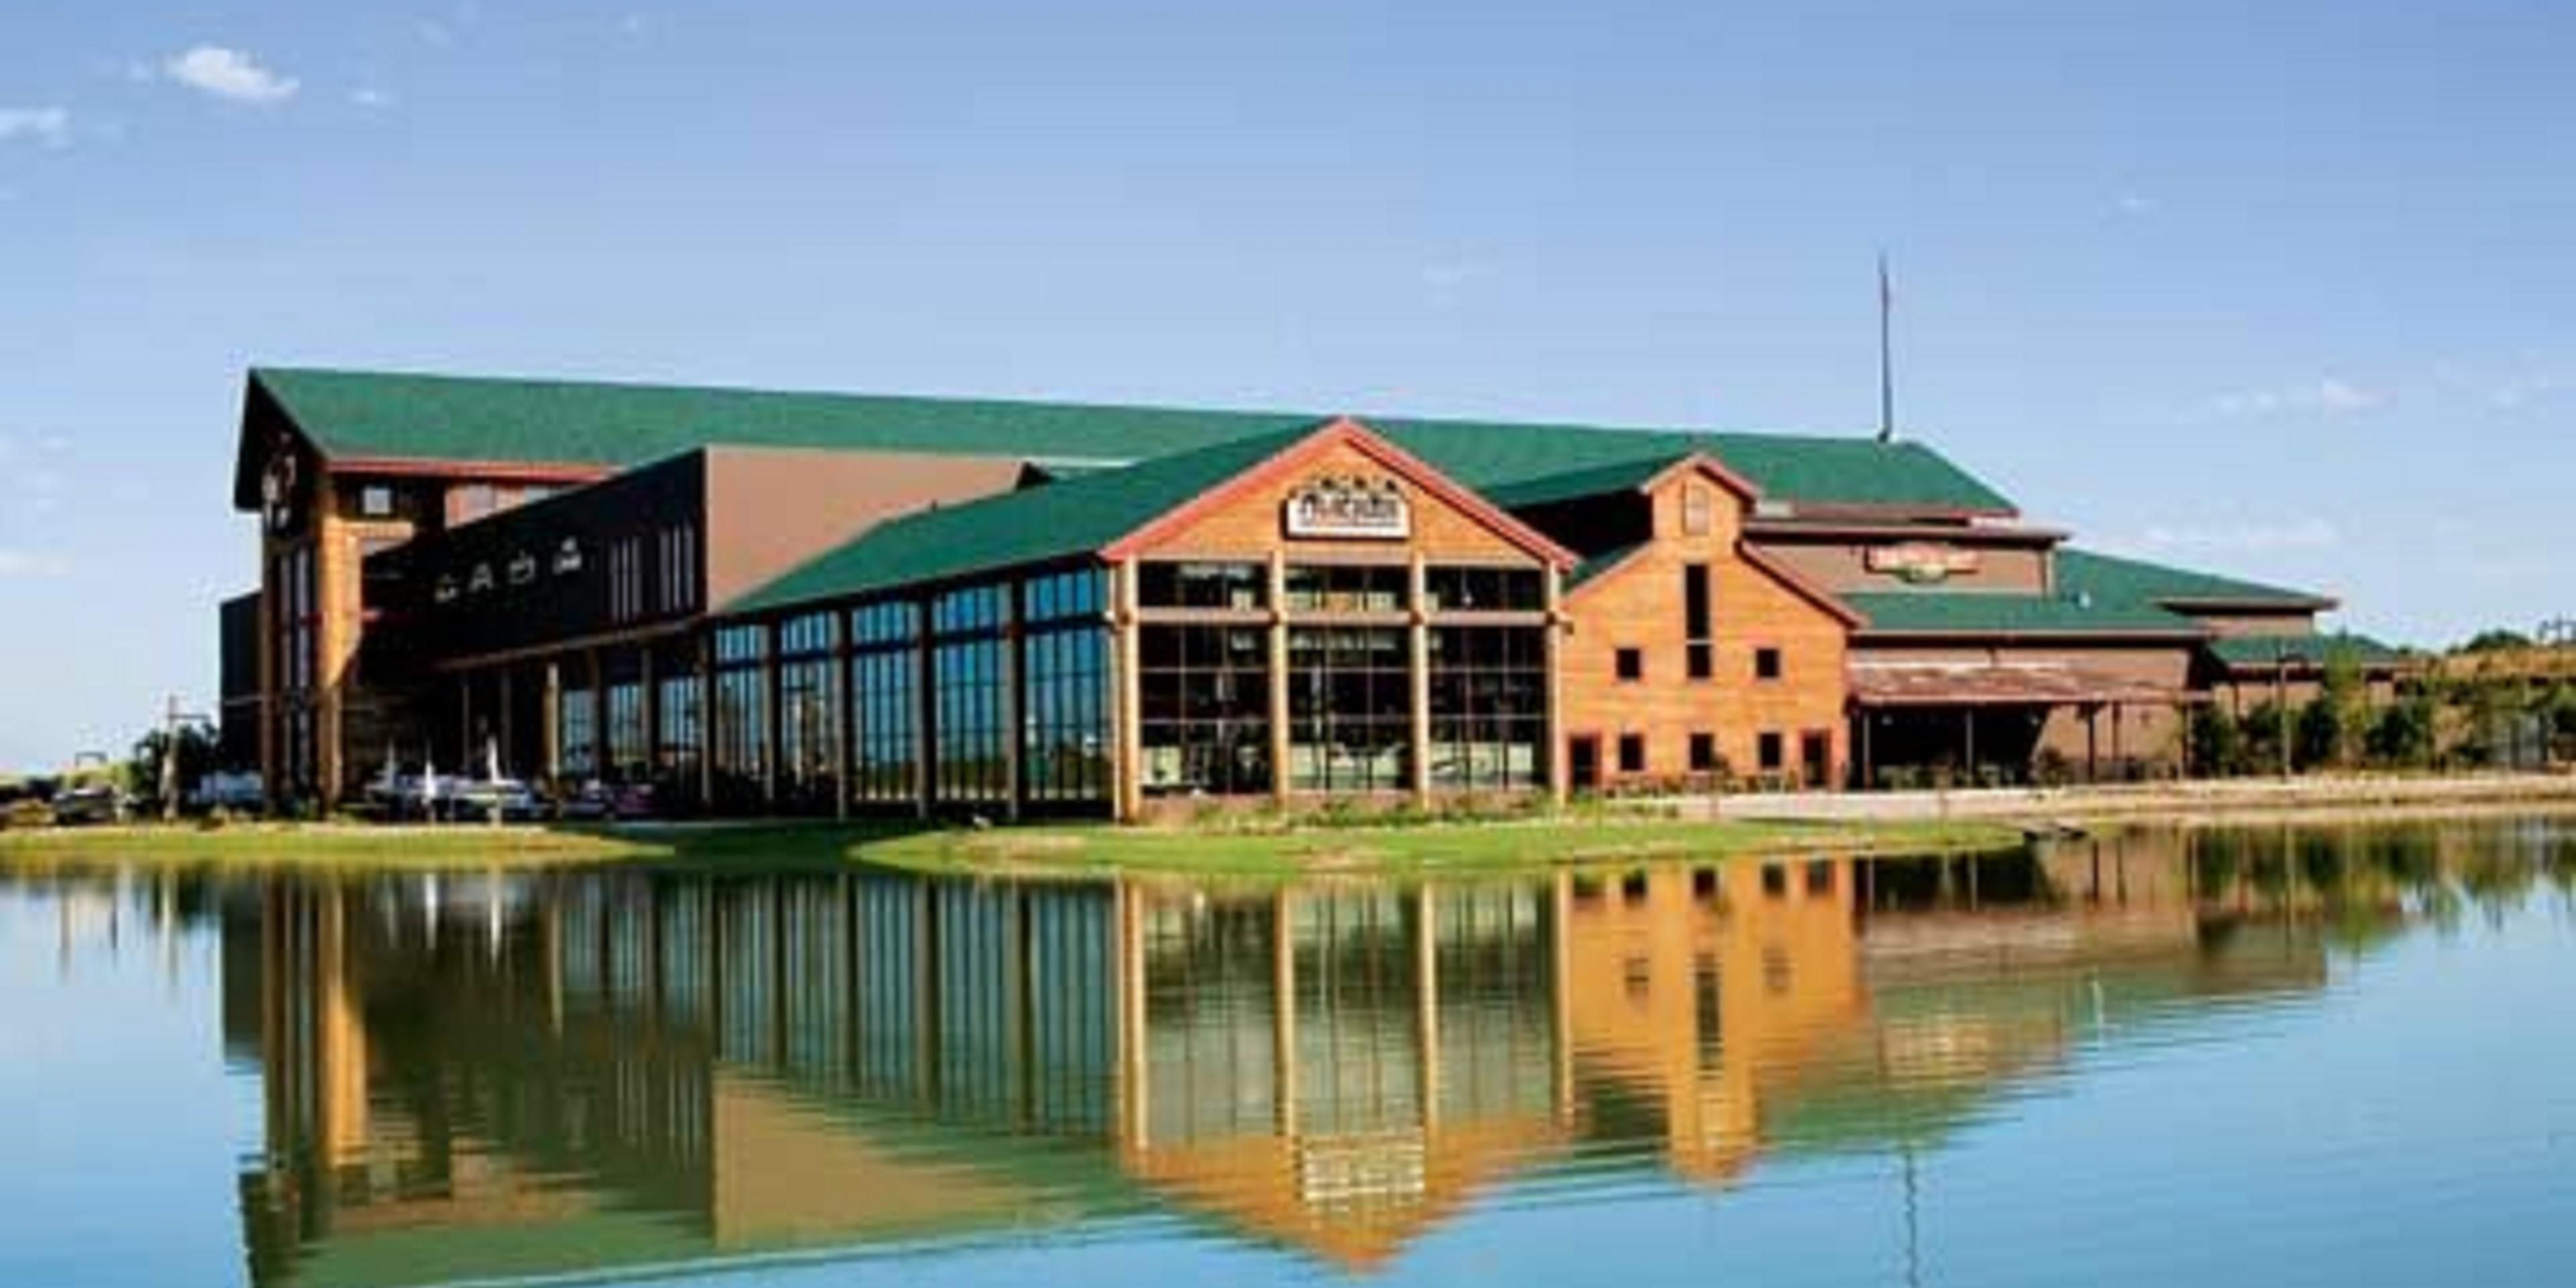 If you love the outdoors then Bass Pro Shop is the store for you. It’s a fun place to take the kids to visit the live fish tanks and see some of the native fish. They offer wildlife displays and outdoor scenes, showrooms and house a huge selection of gear from all the industry’s top brands. 